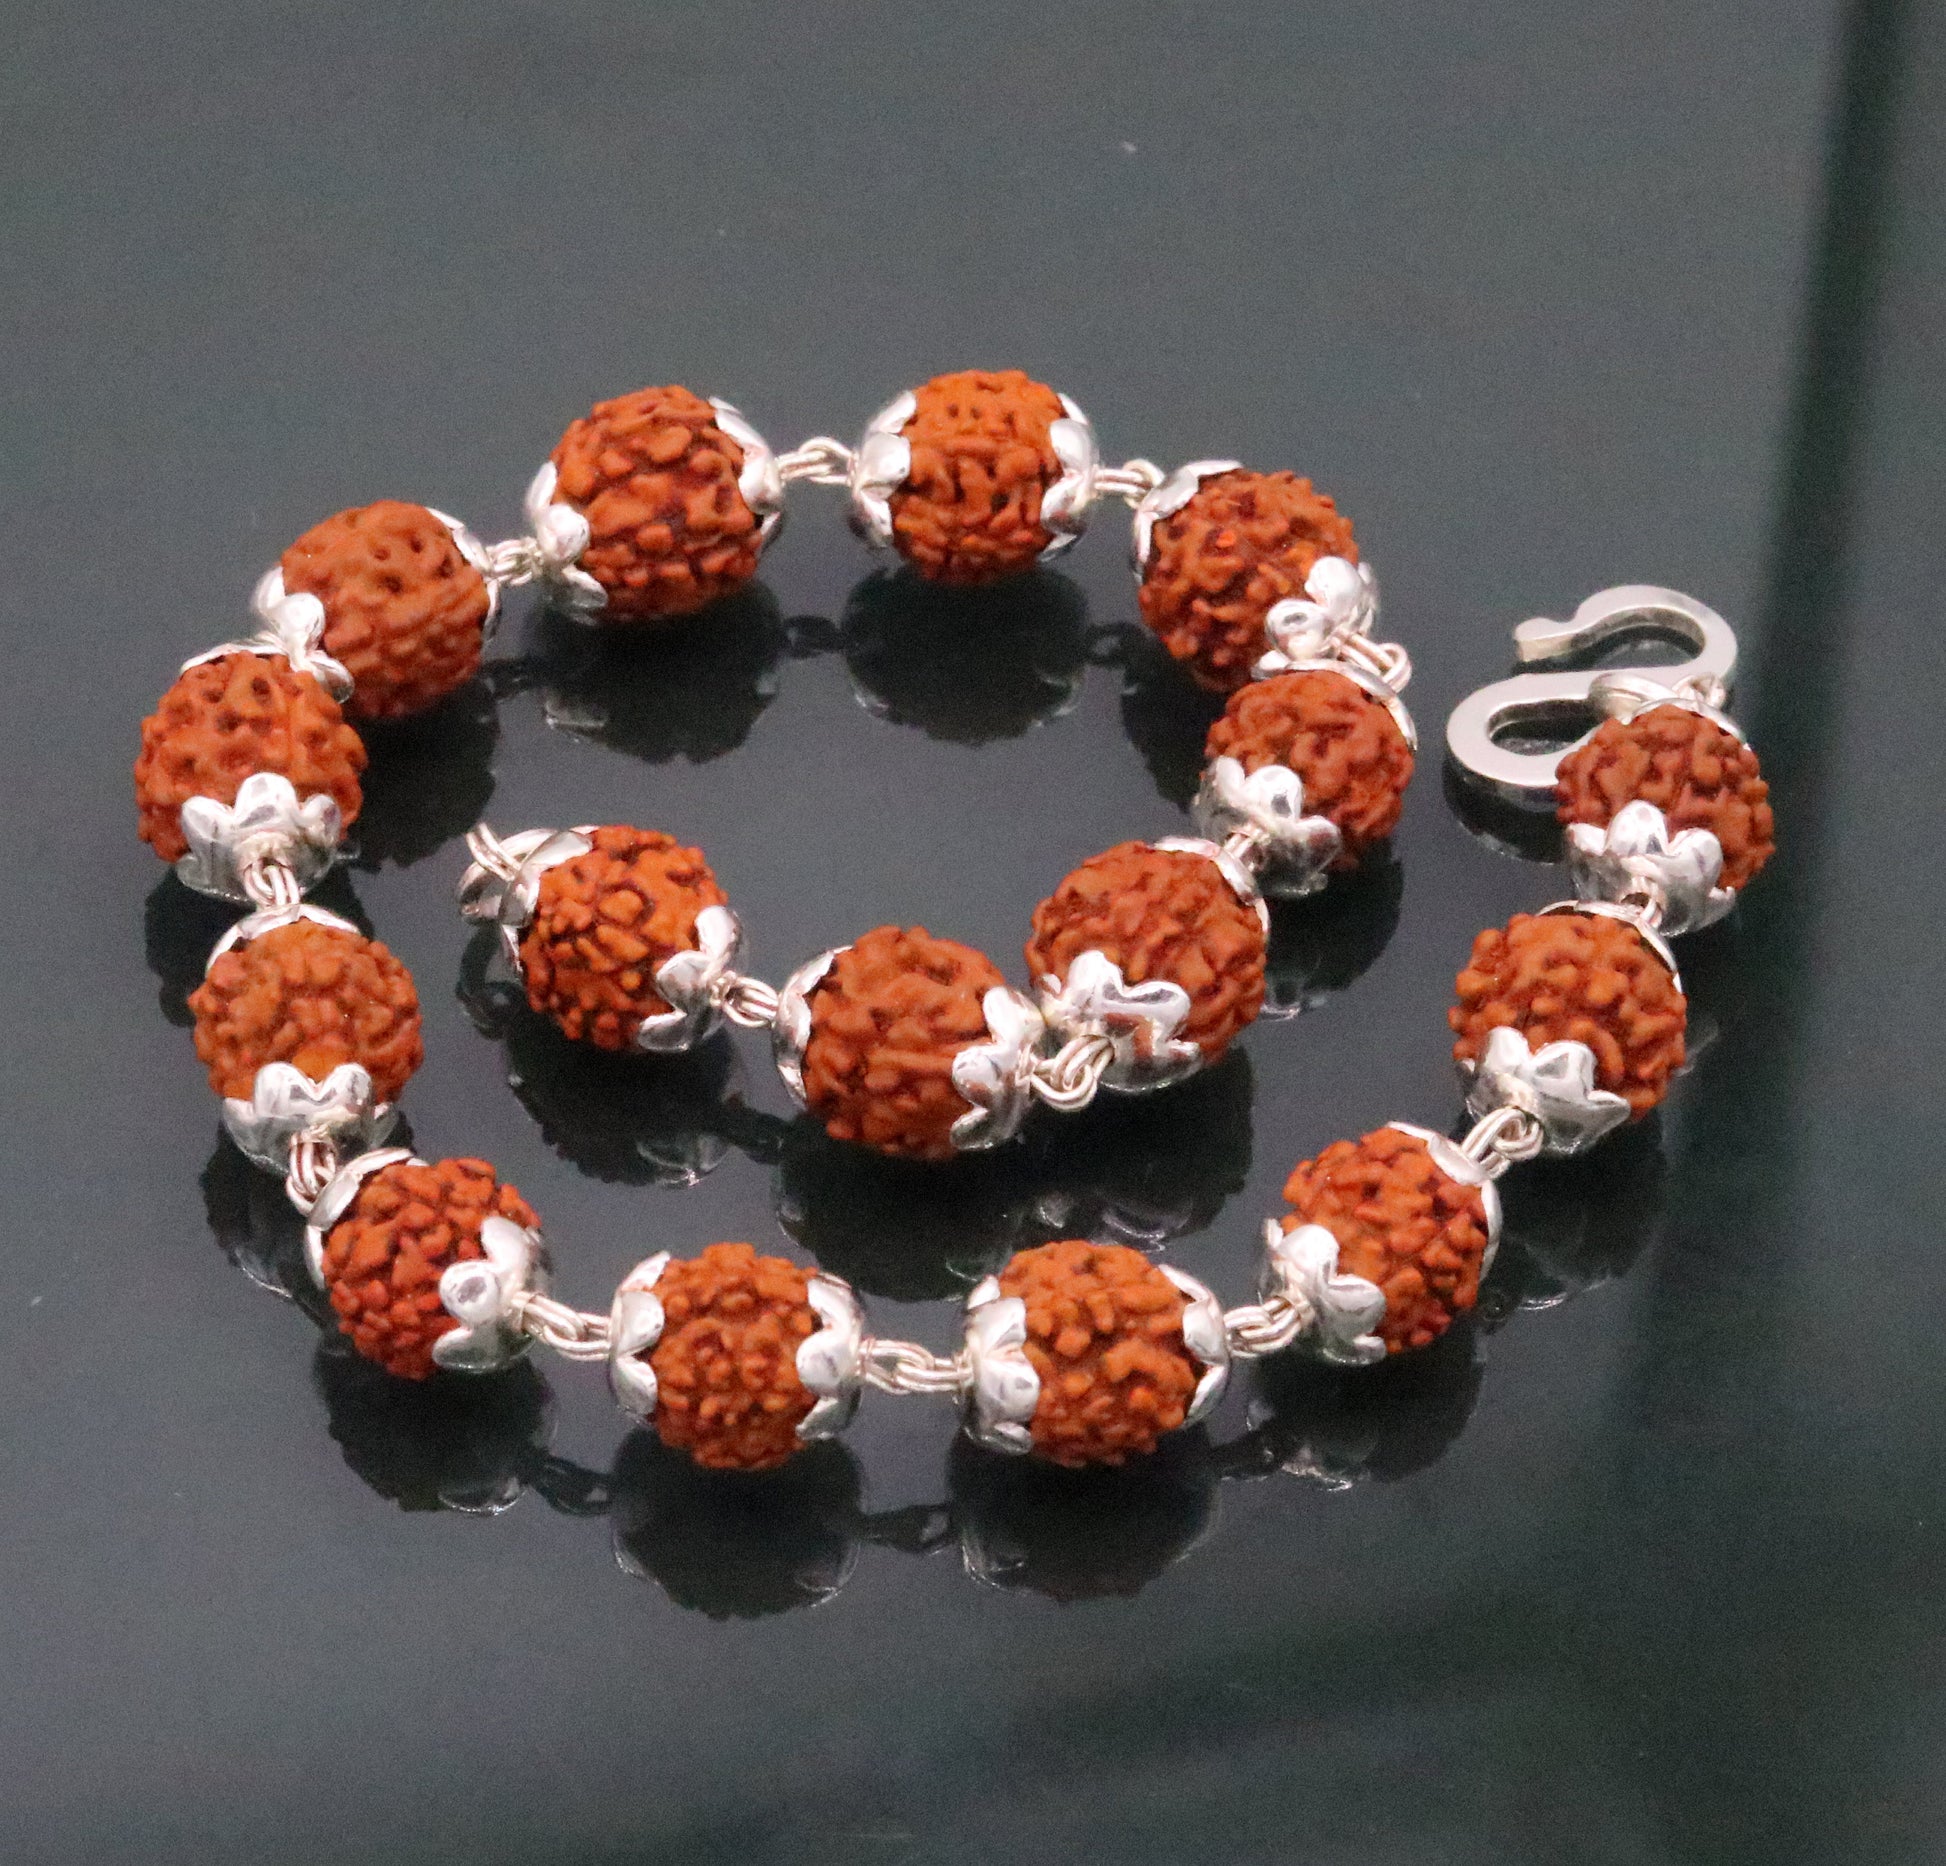 Solid silver handmade Natural Rudraksha beads 8.5 inches long bracelet jewelry from rajasthan india  sbr50 - TRIBAL ORNAMENTS